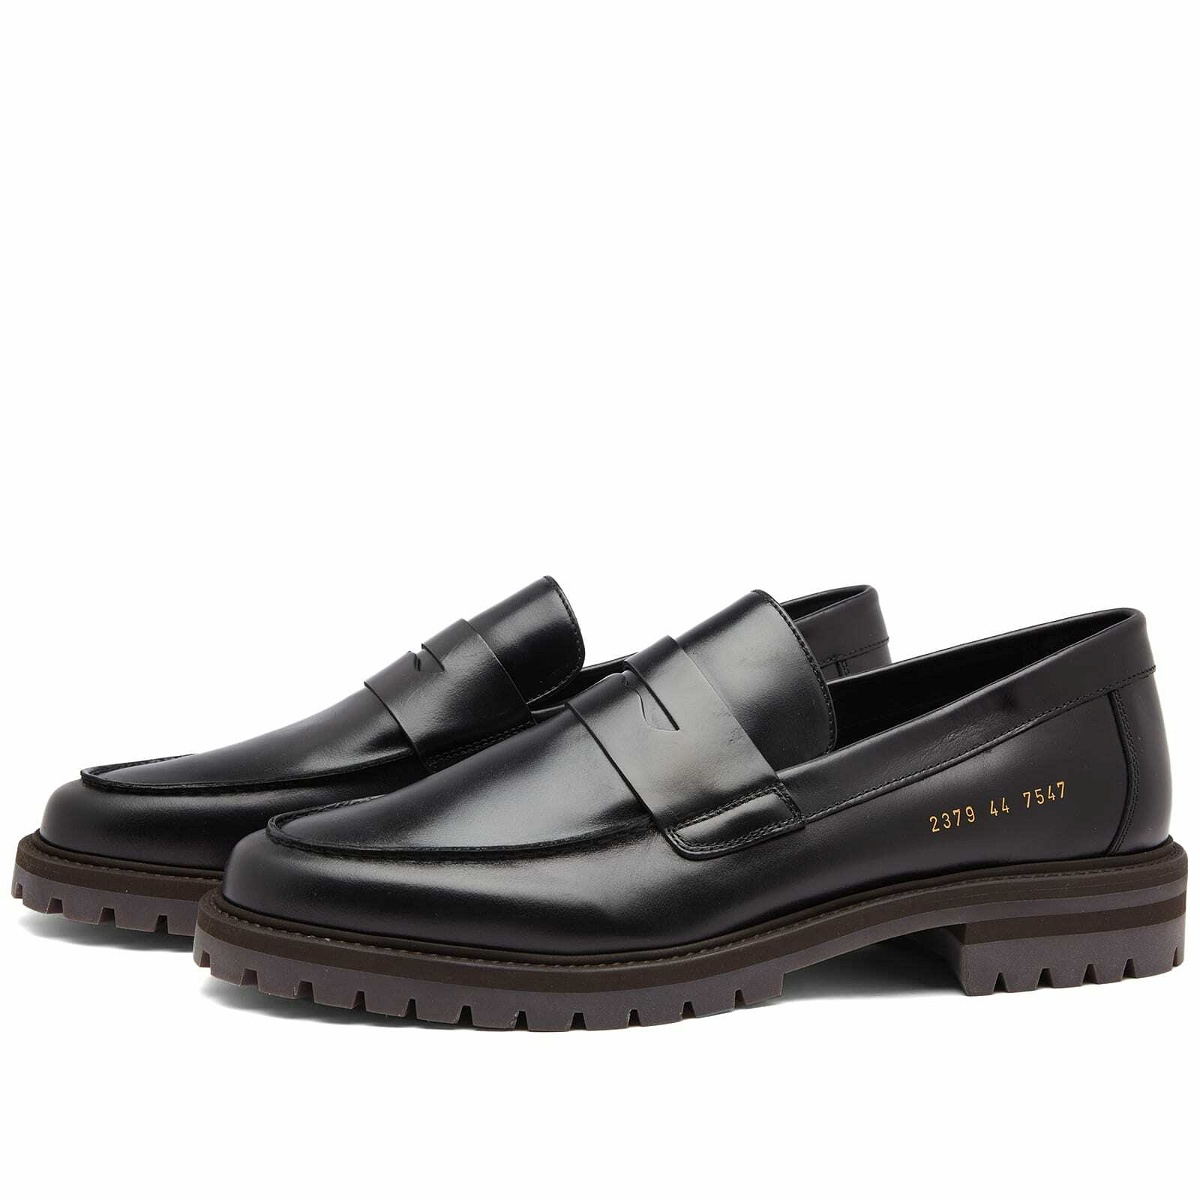 Photo: Common Projects Men's Lug Sole Loafer in Black